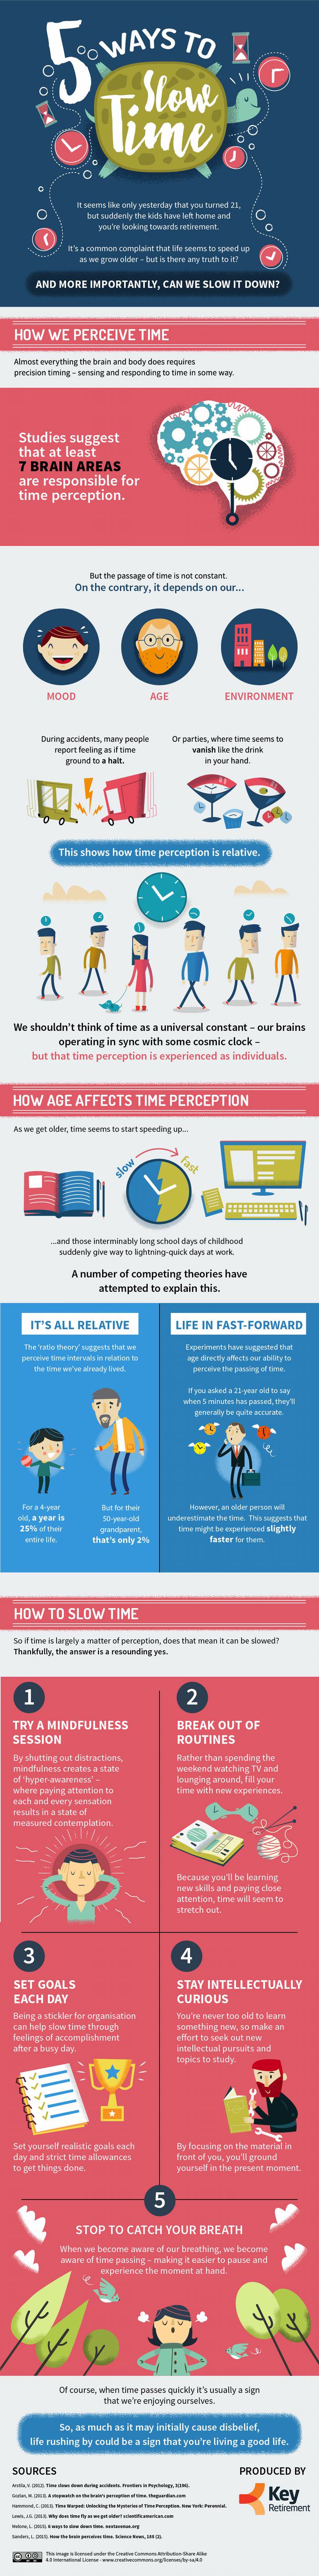 infographic 5 ways to slow down time